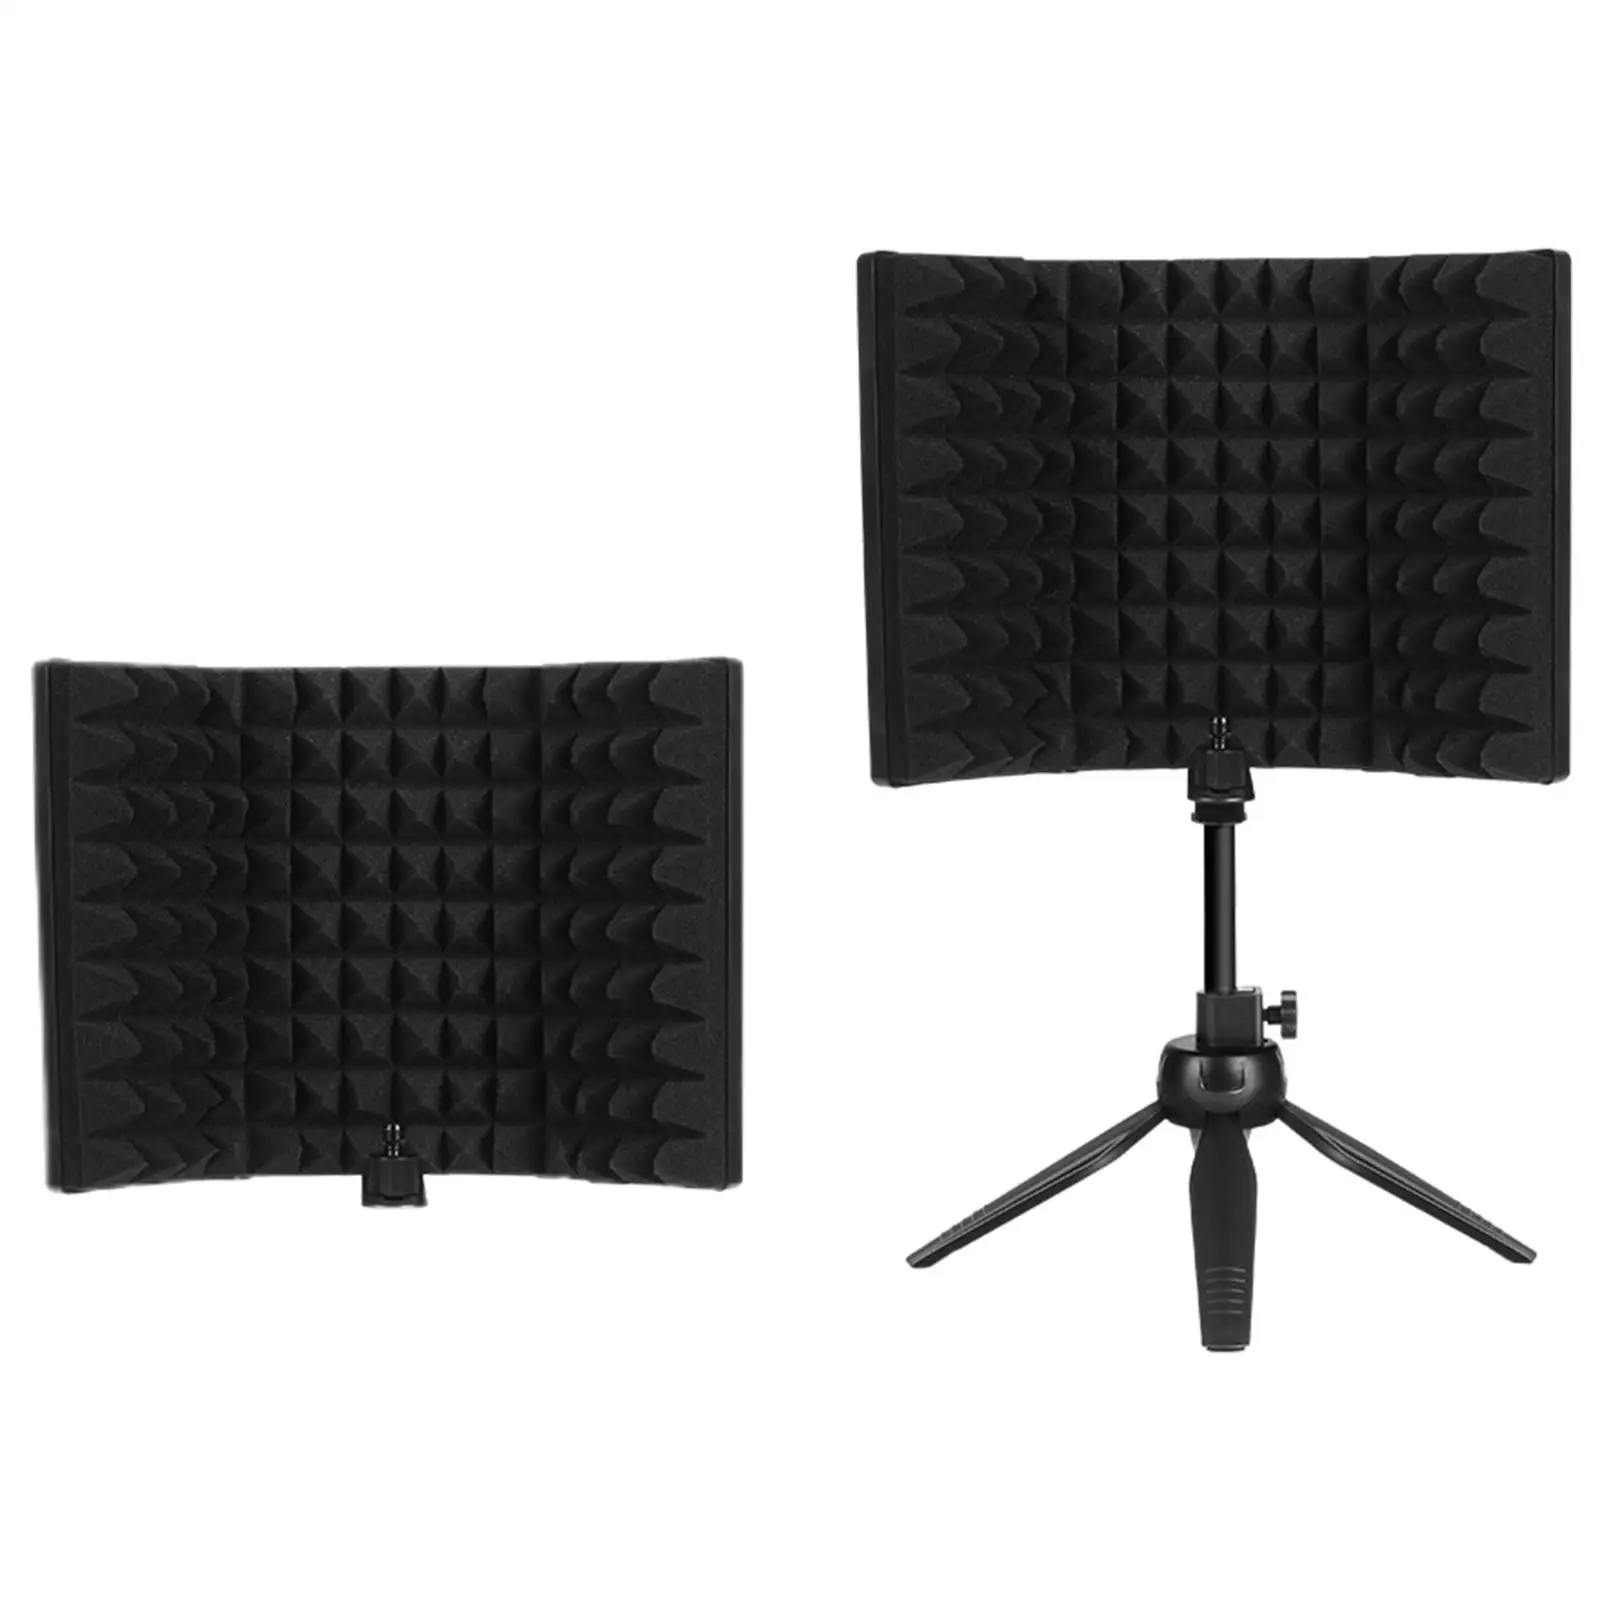 Professional Microphone Isolation Shield Studio Recording Acoustic Sound Shield